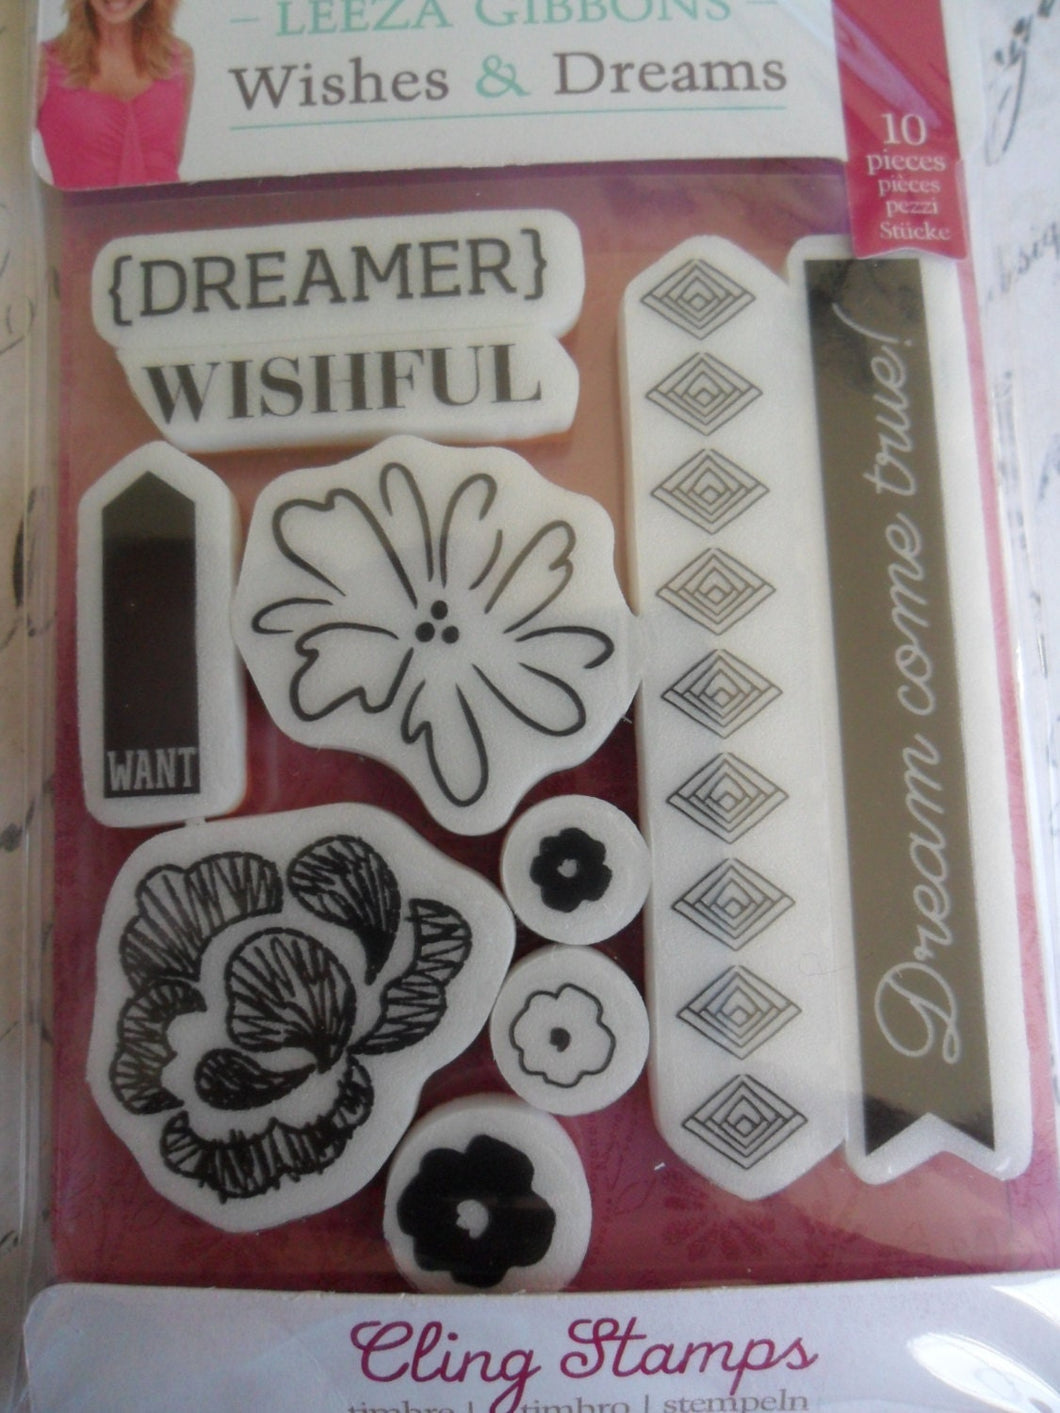 Prima Cling Rubber Stamp Set Wishes and Dreams Collection by Leeza Gibbons